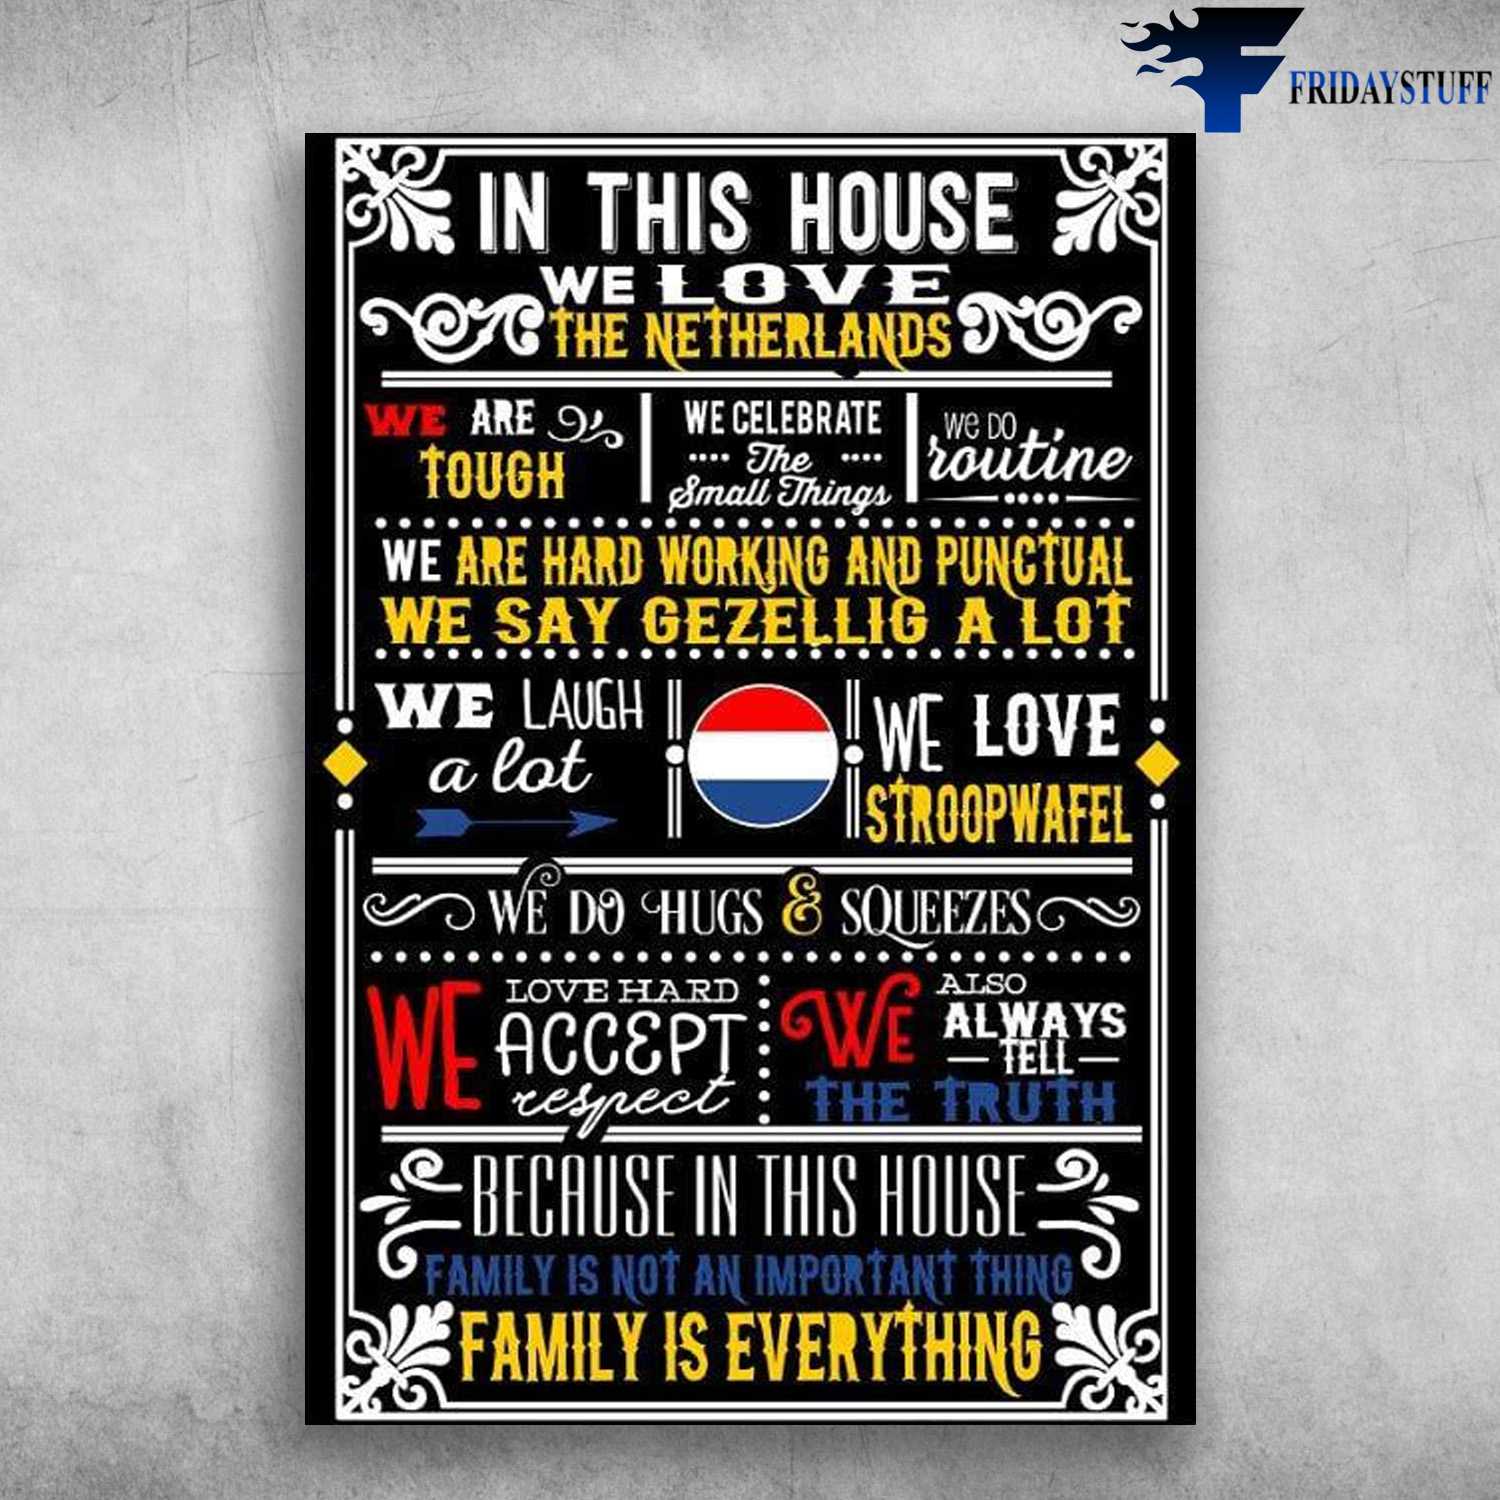 Neiherlands House - In This House, We Love The Neiherlands, We Are Tough, We Celebrate The Small Things, We Do Routine, We Are Hard Working And Punctual, Family Is Everything